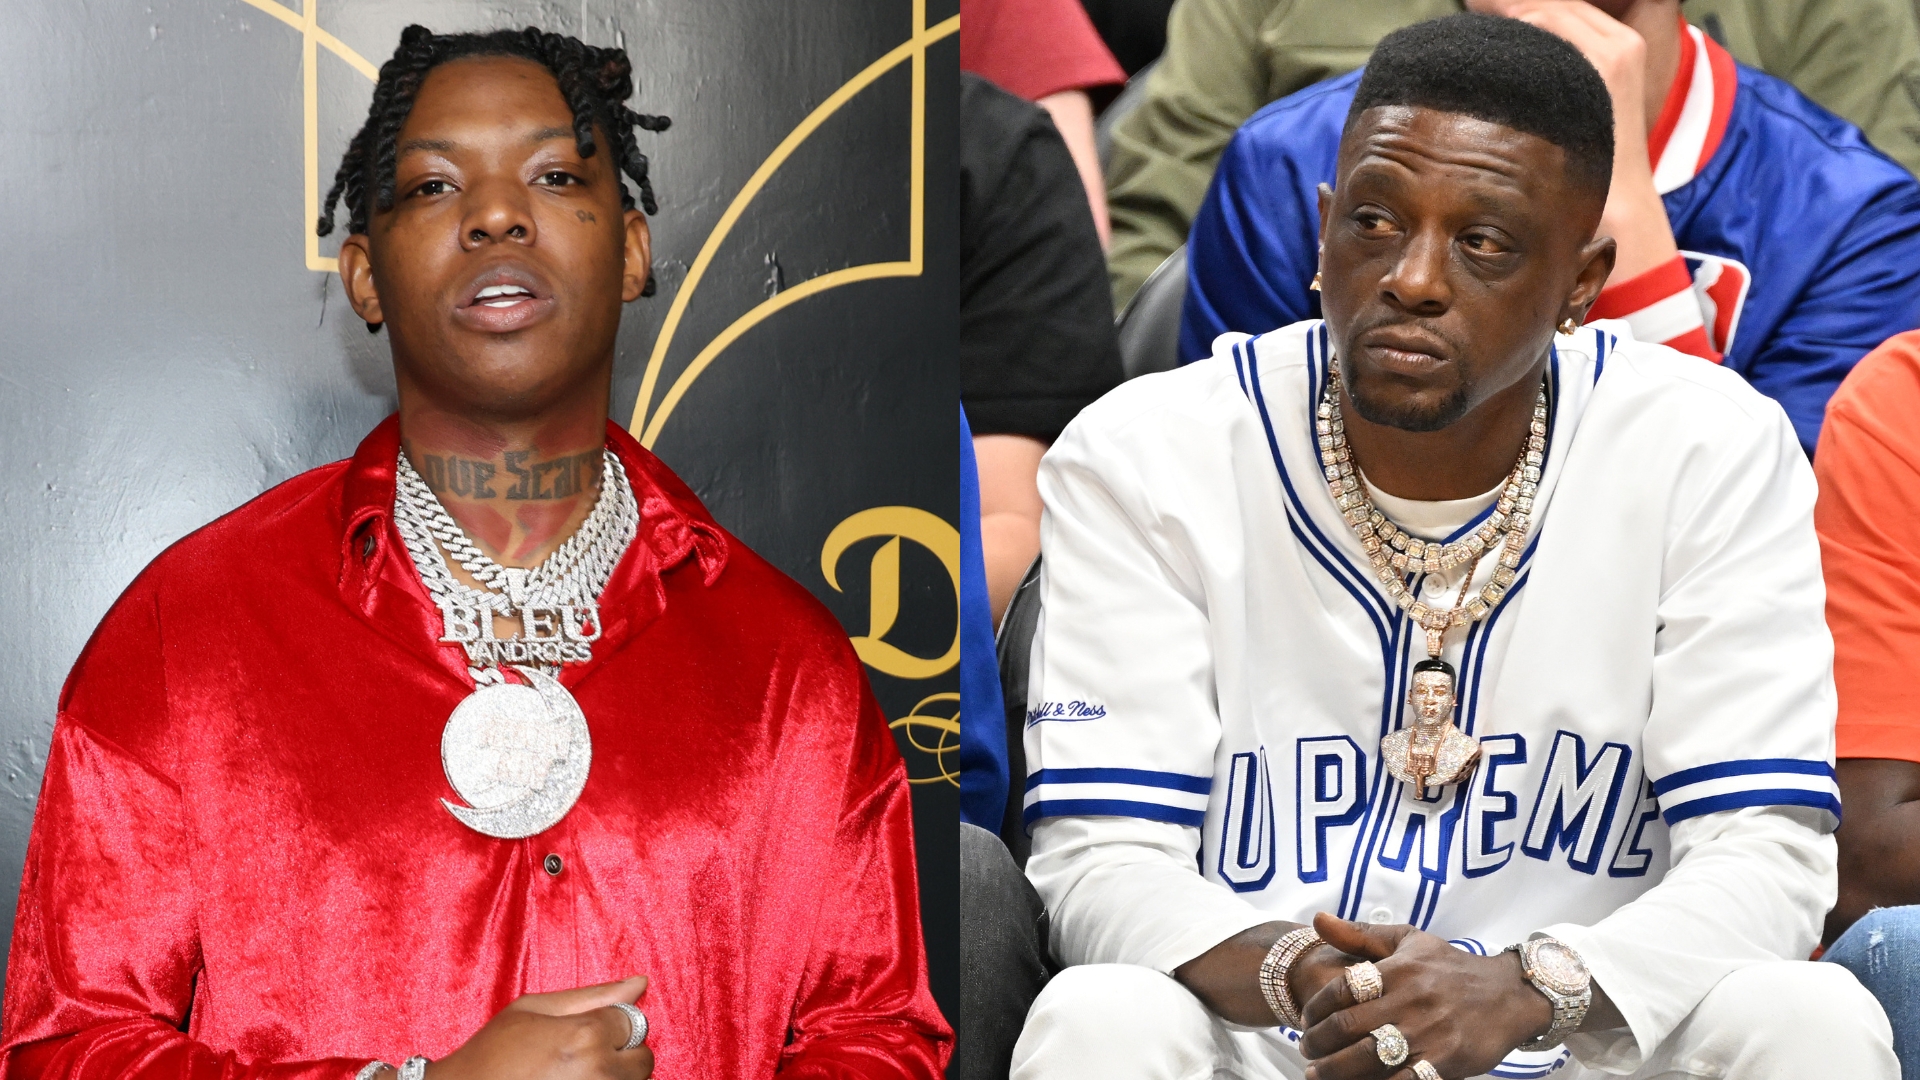 Boosie Badazz Further Disses Yung Bleu, Says He Stole $30K & Had To Press Him For It